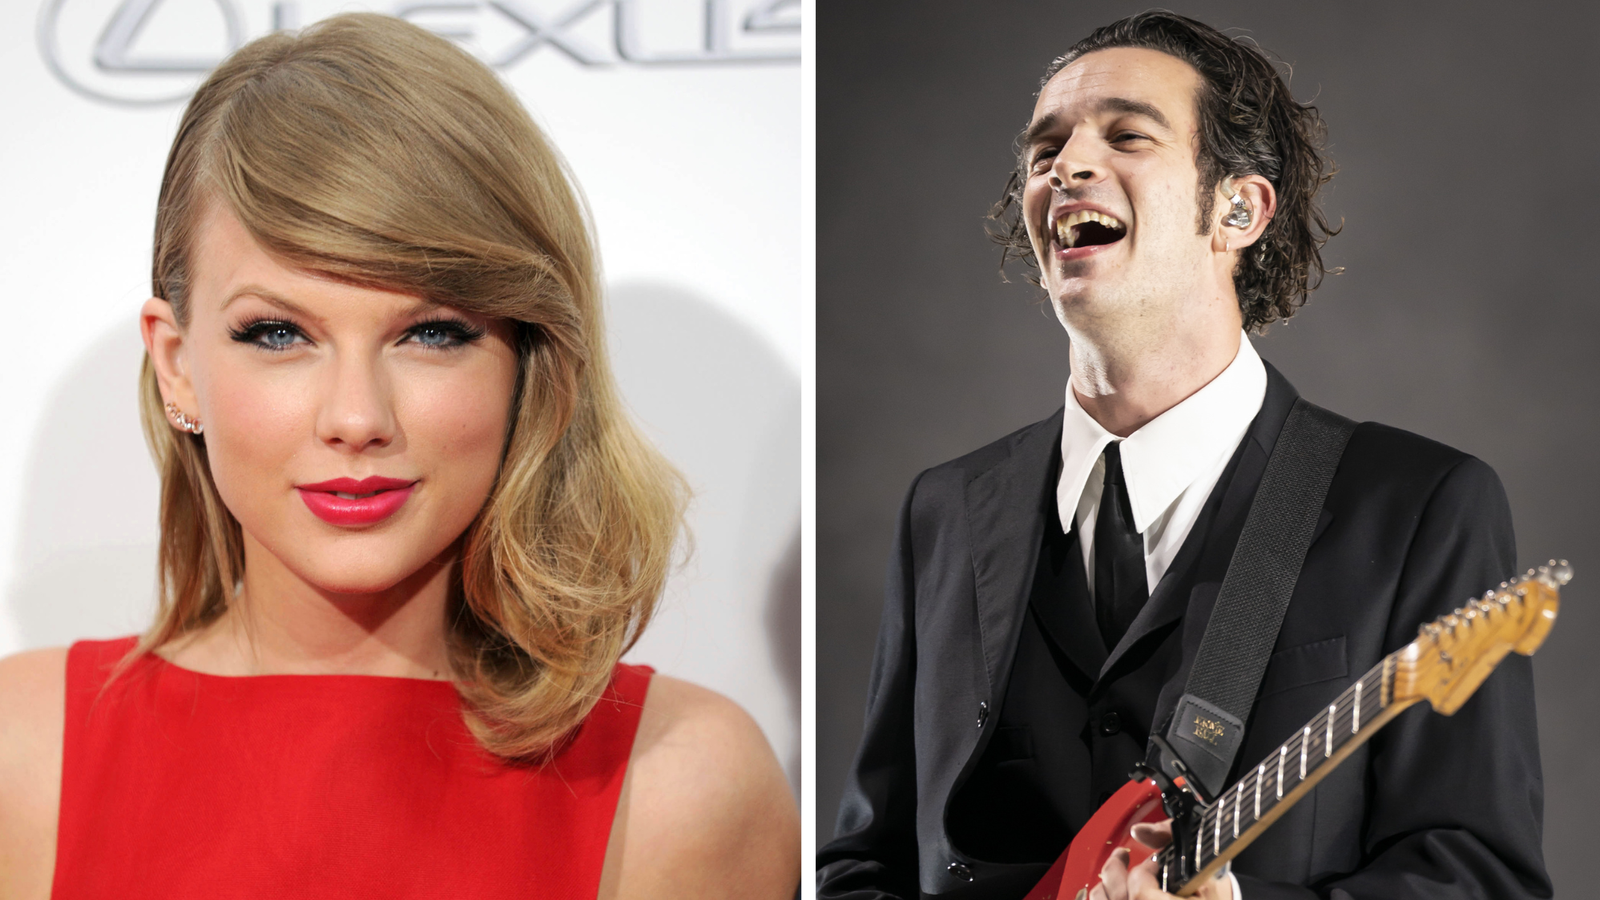 Matty Healy reacts to Taylor Swift's 'diss track'